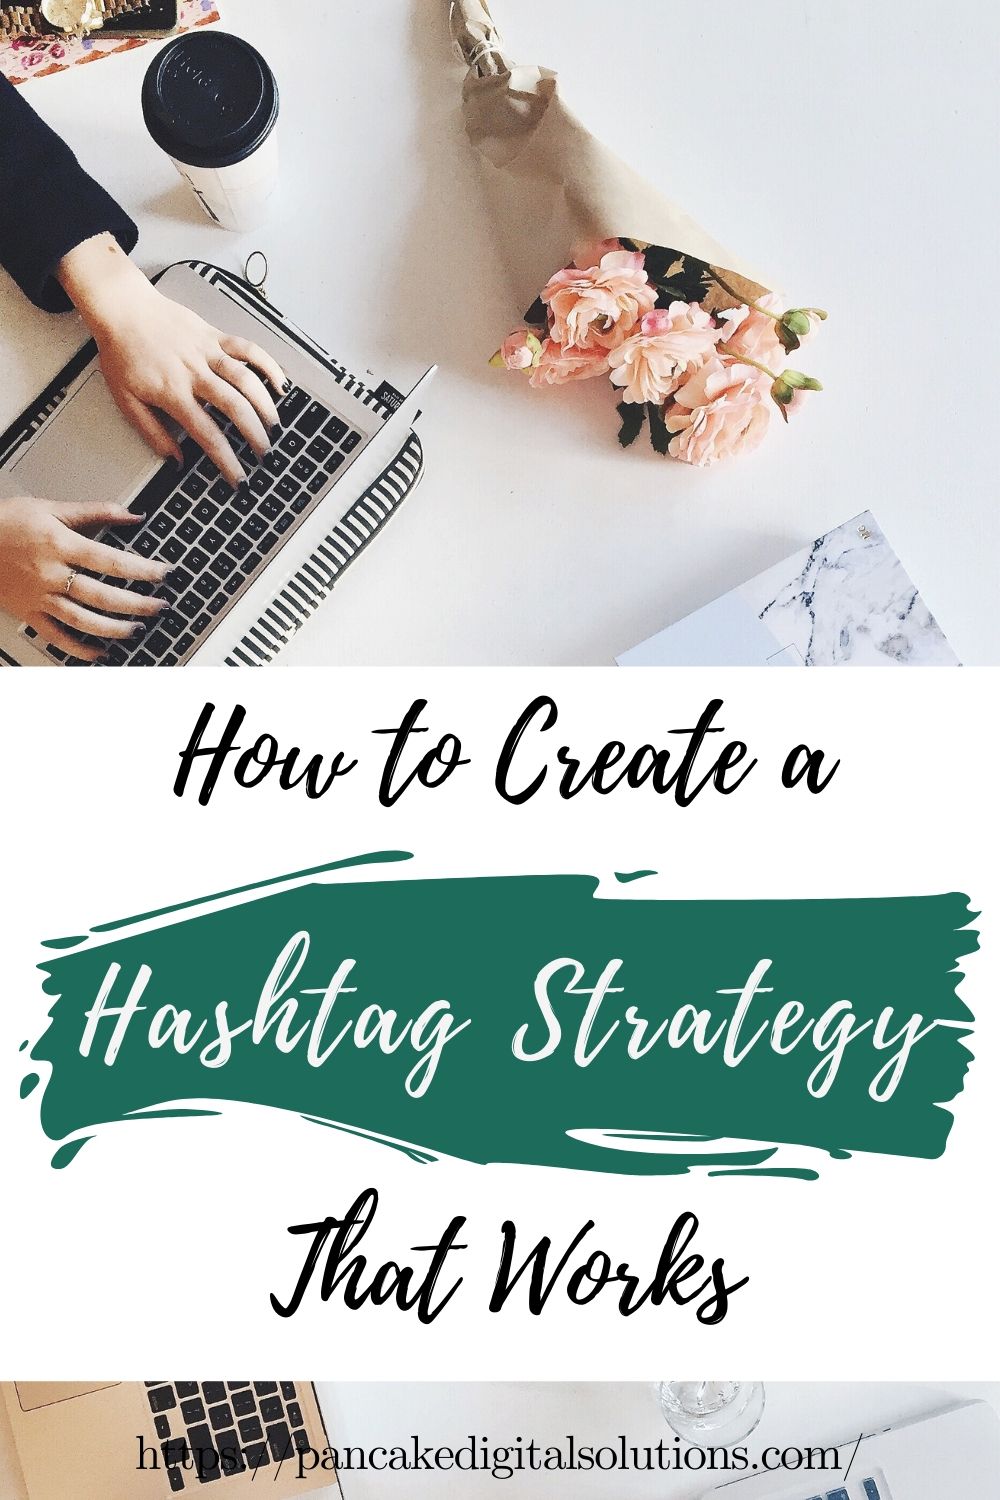 How to Create a Hashtag Strategy That Works